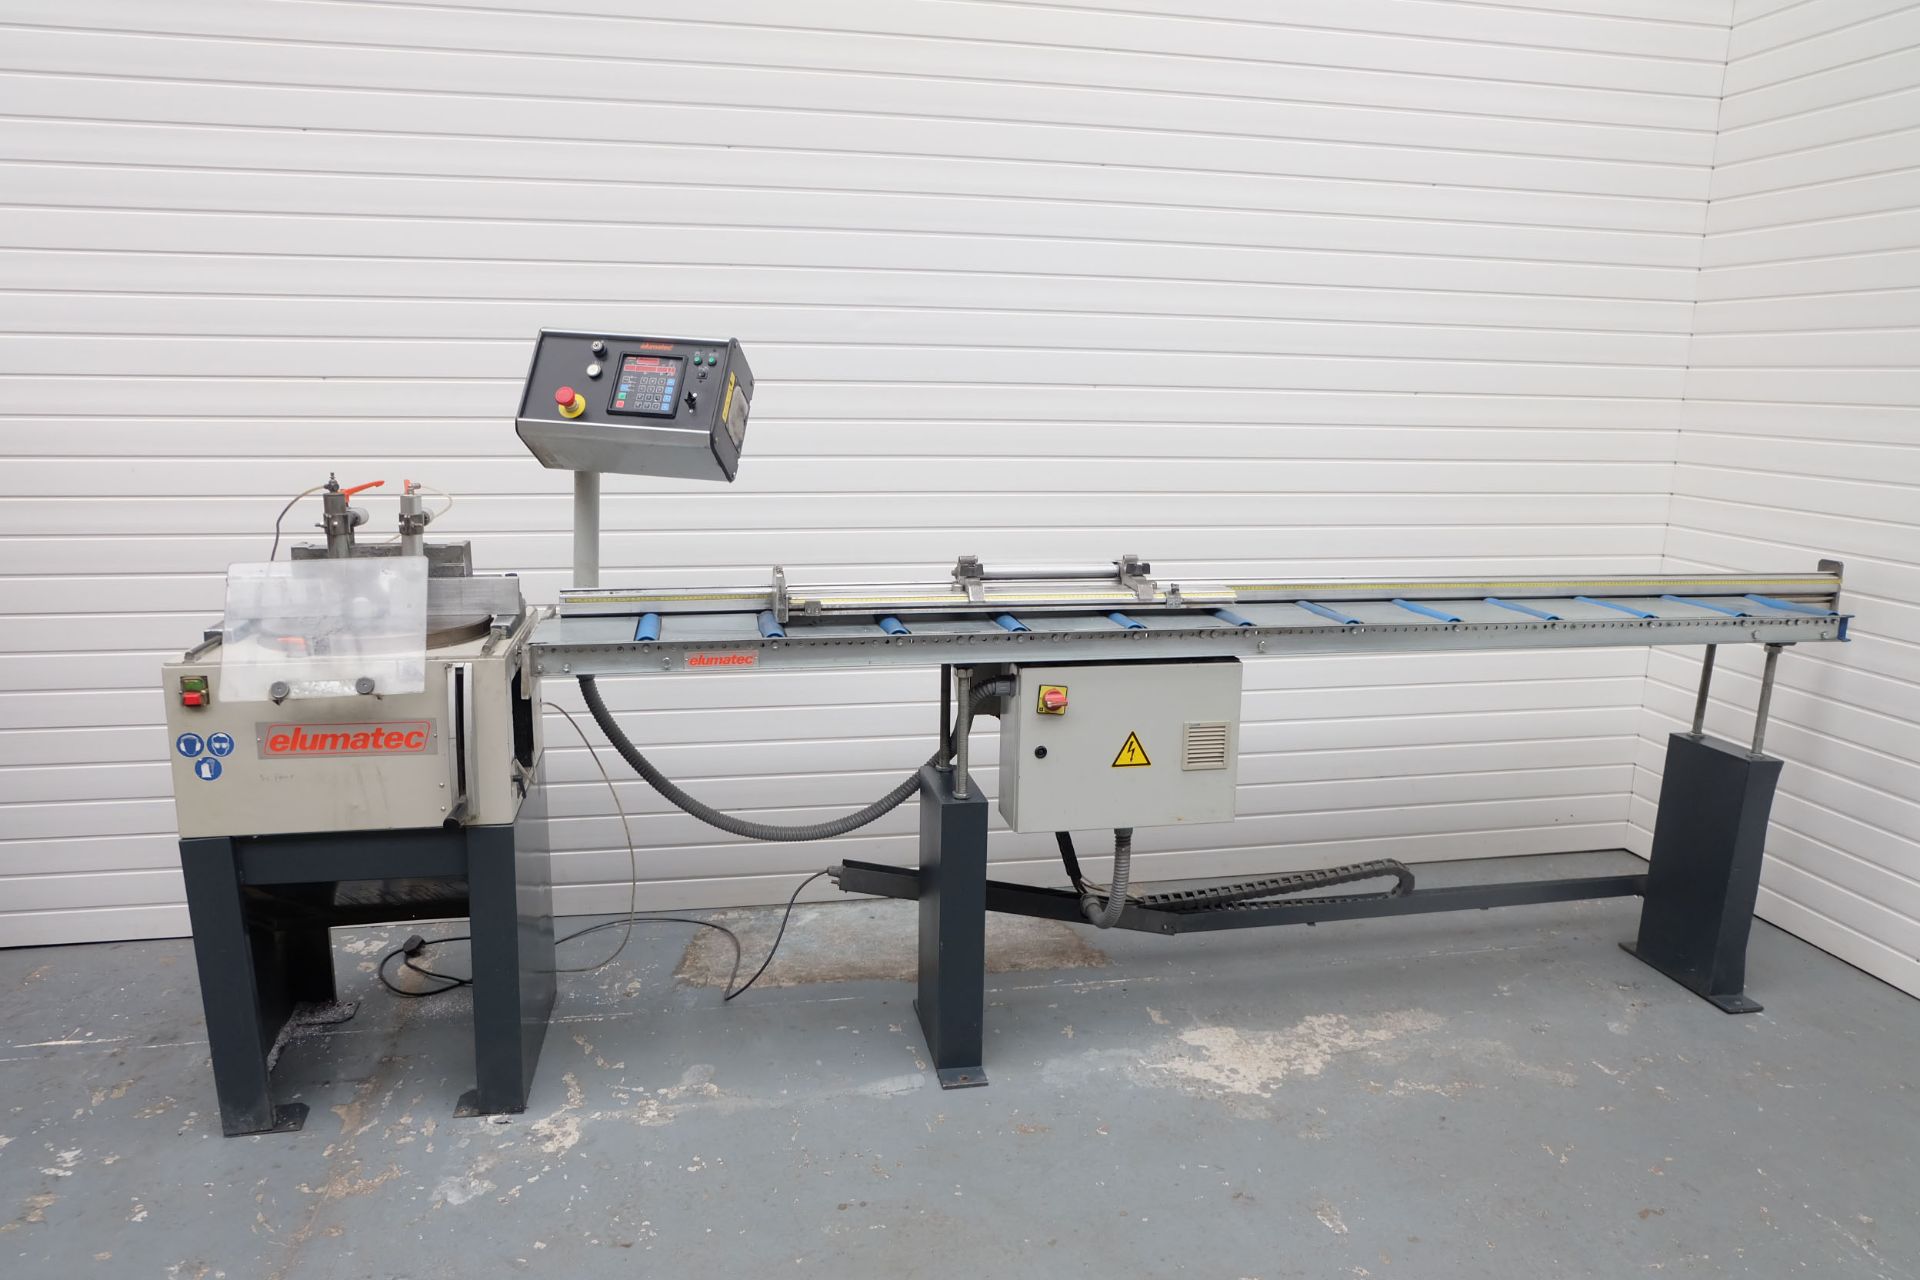 Elumatec Model TS 161/21 Table Saw with Pneumatic Clamping.